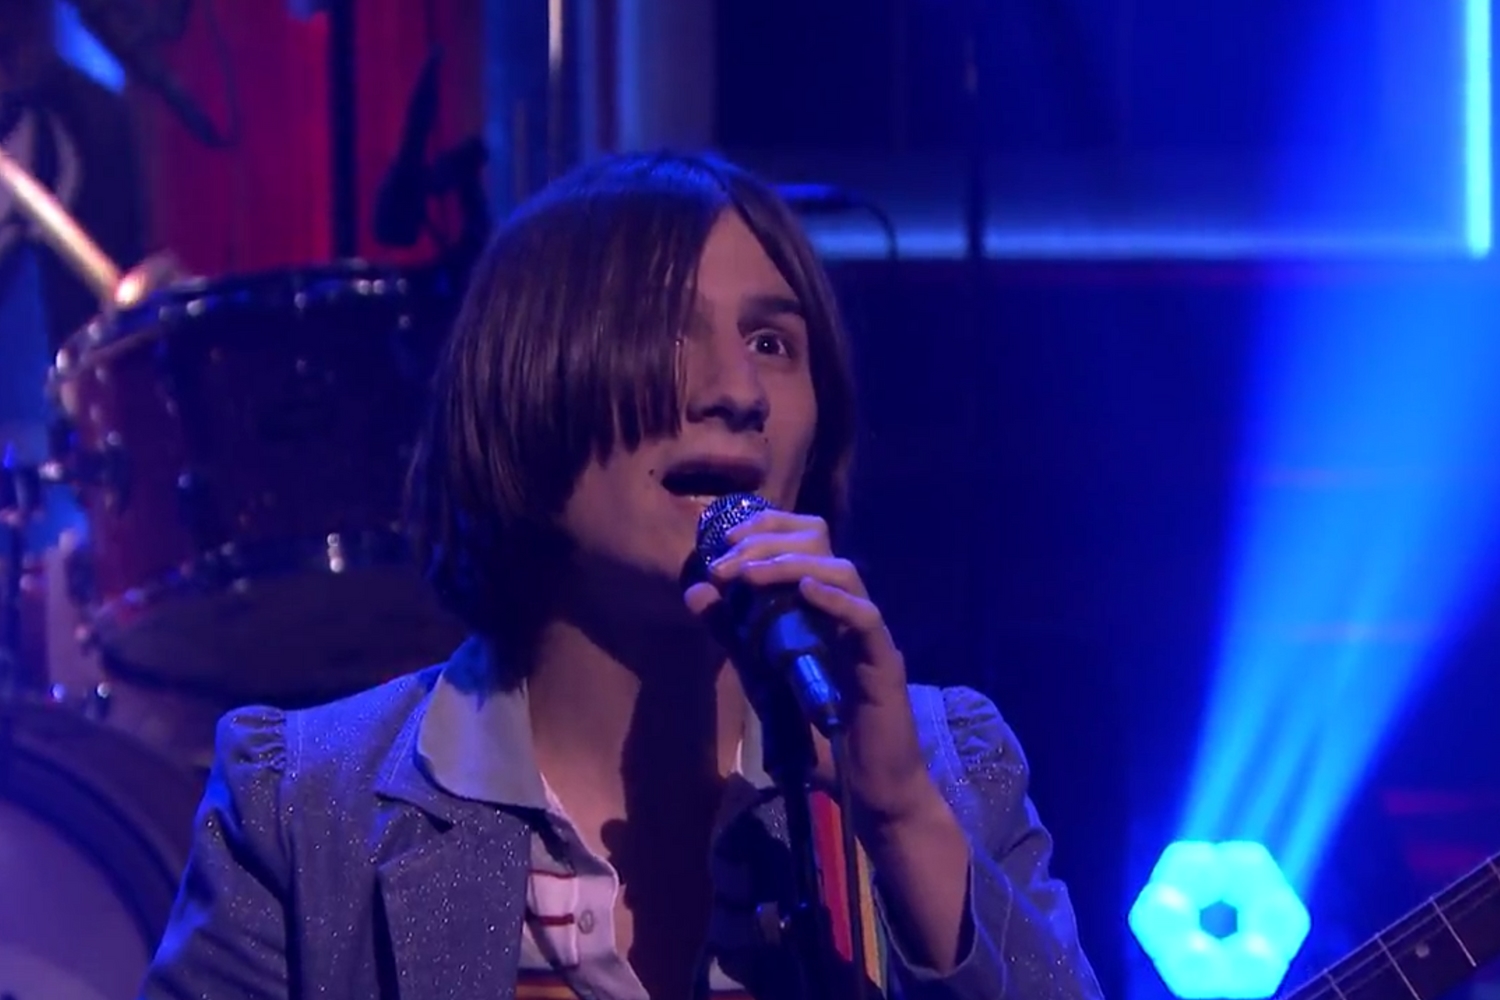 Watch The Lemon Twigs bring 'These Words' to Fallon